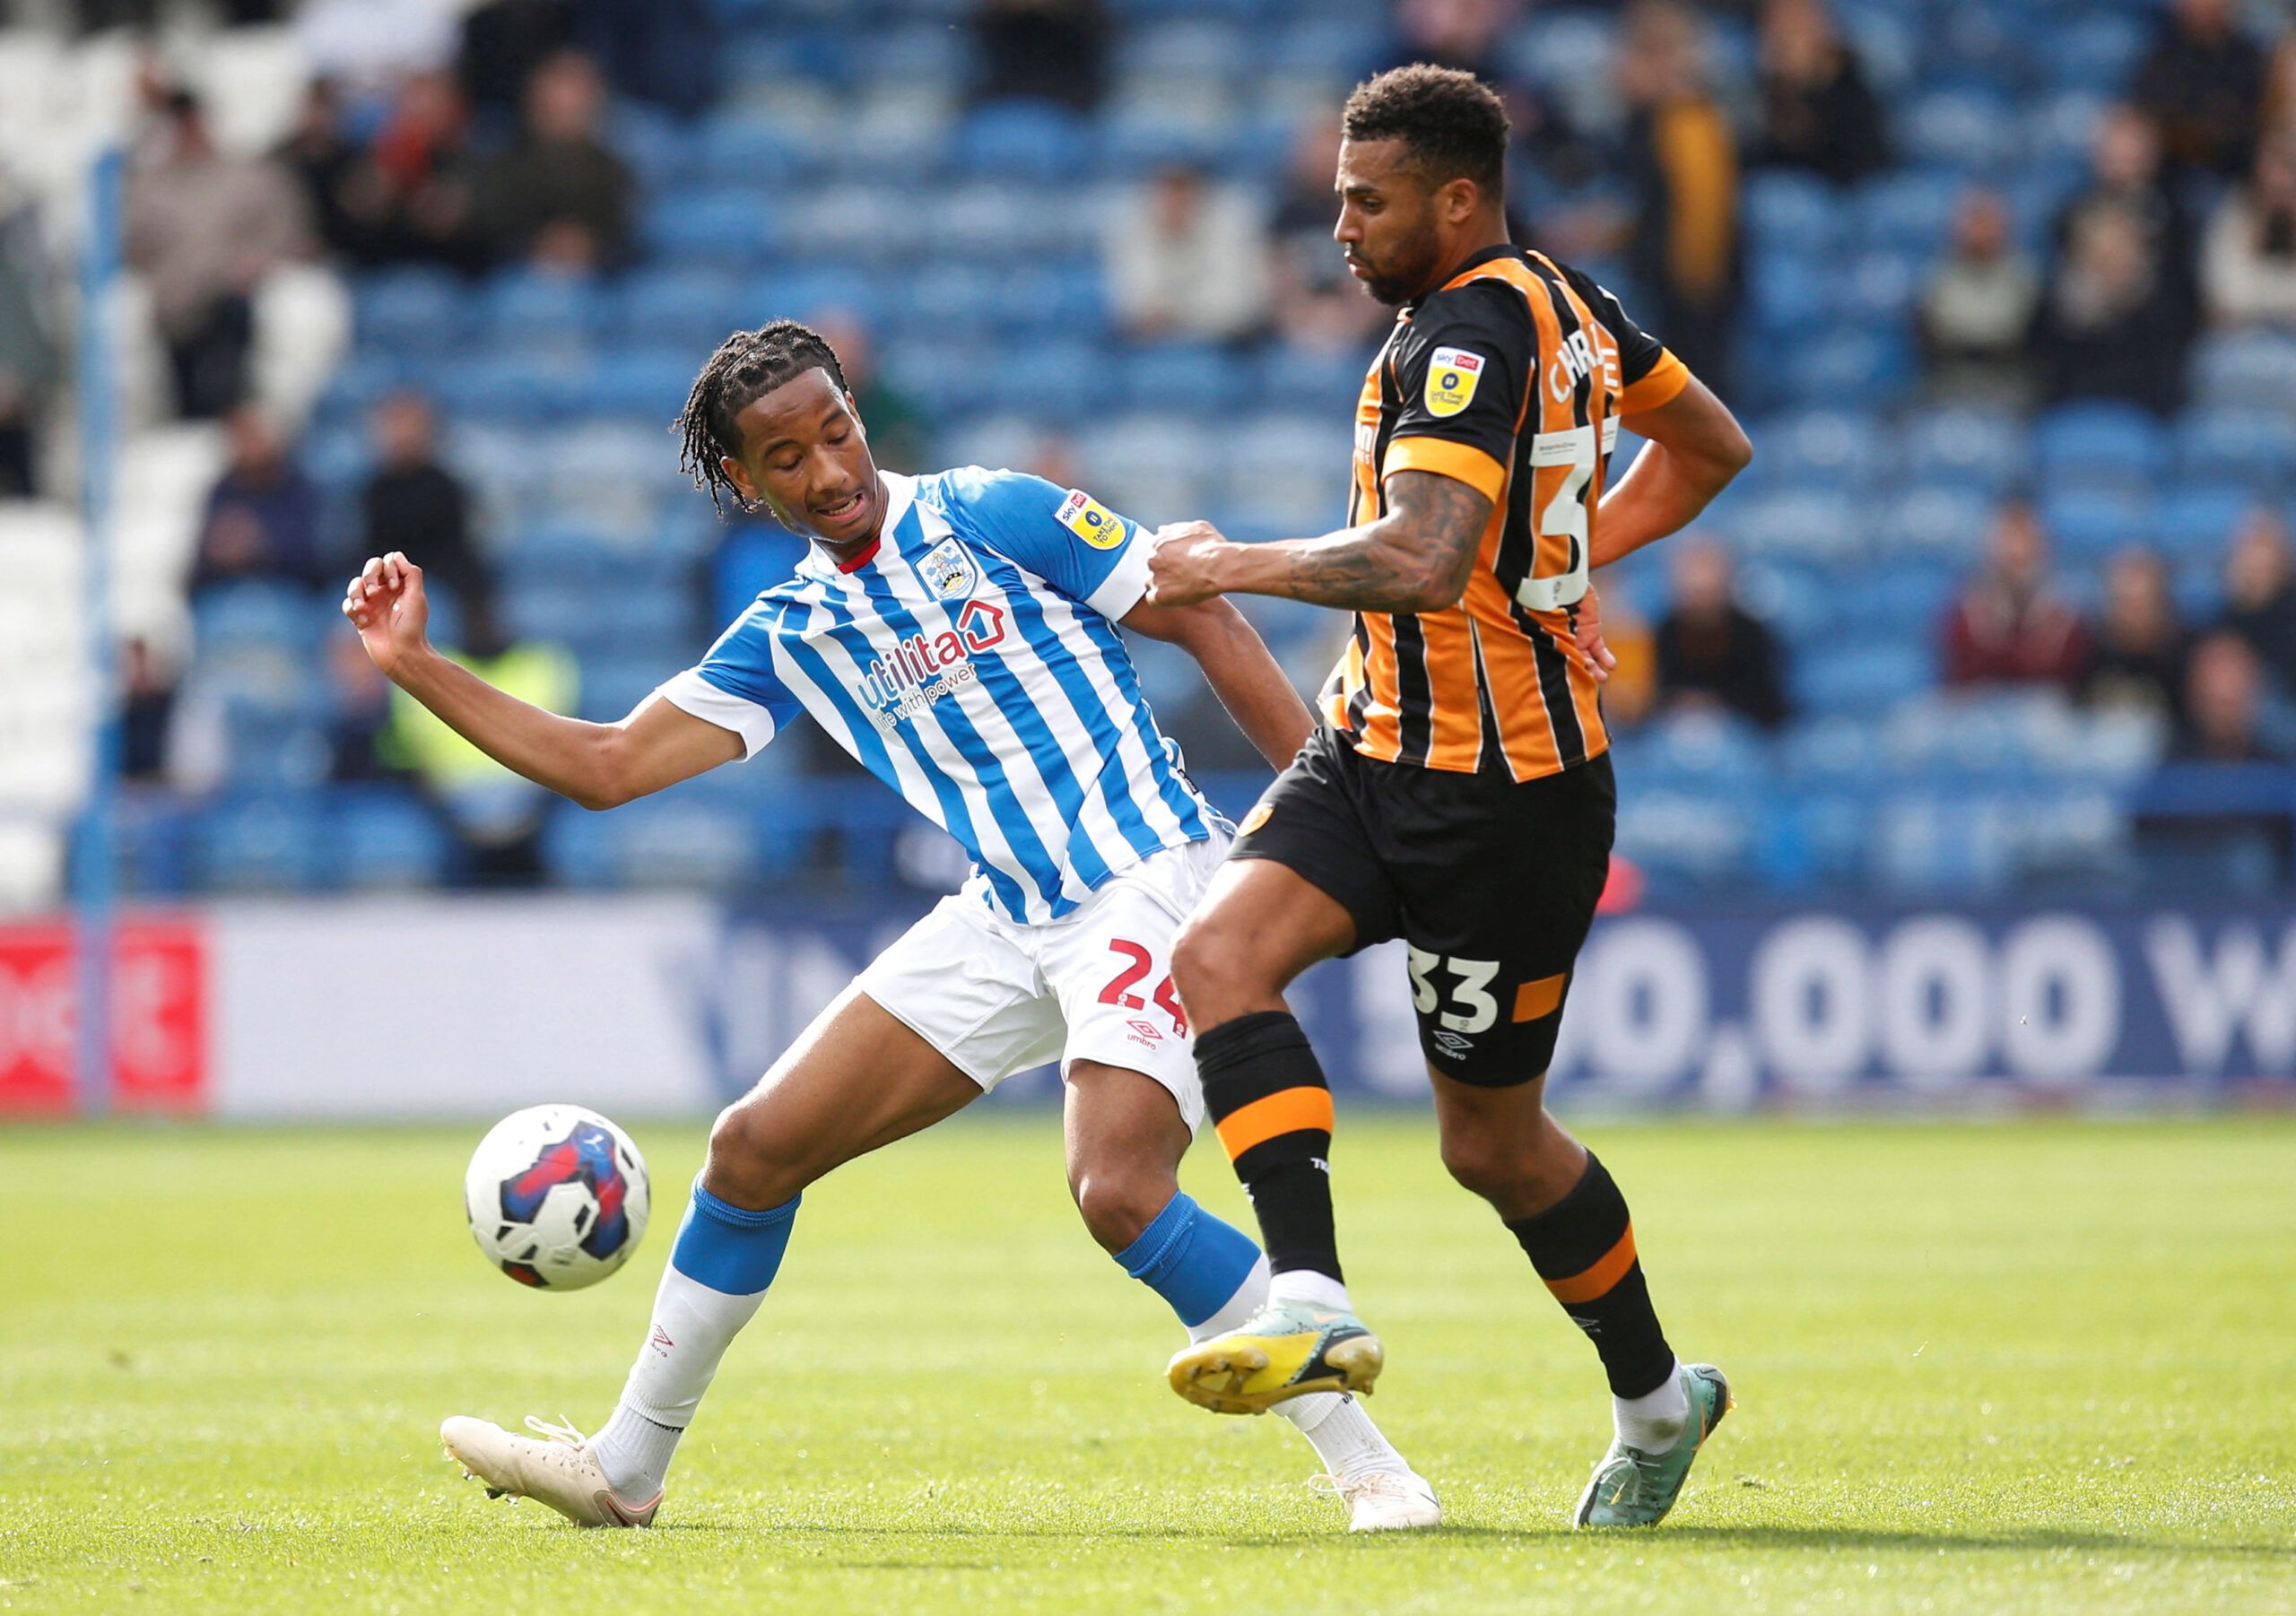 Soccer Football - Championship - Huddersfield Town v Hull City - John Smith's Stadium, Huddersfield, Britain - October 9, 2022 Huddersfield Town's Etienne Camara in action with Hull City's Cyrus Christie Action Images/Ed Sykes  EDITORIAL USE ONLY. No use with unauthorized audio, video, data, fixture lists, club/league logos or 